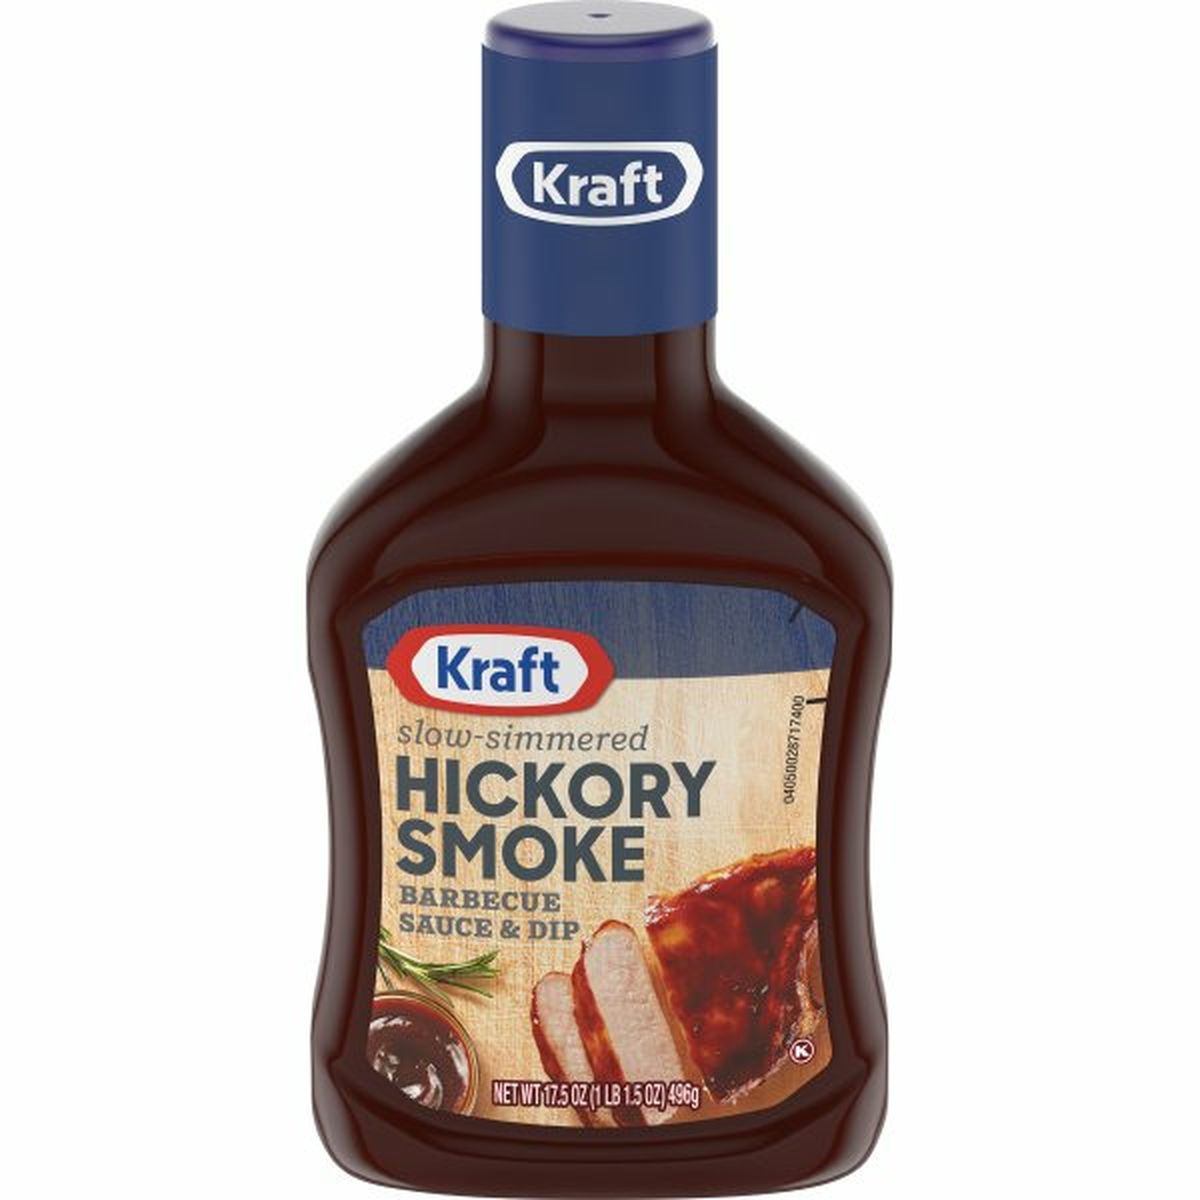 Calories in Kraft Hickory Smoke Barbecue Sauce